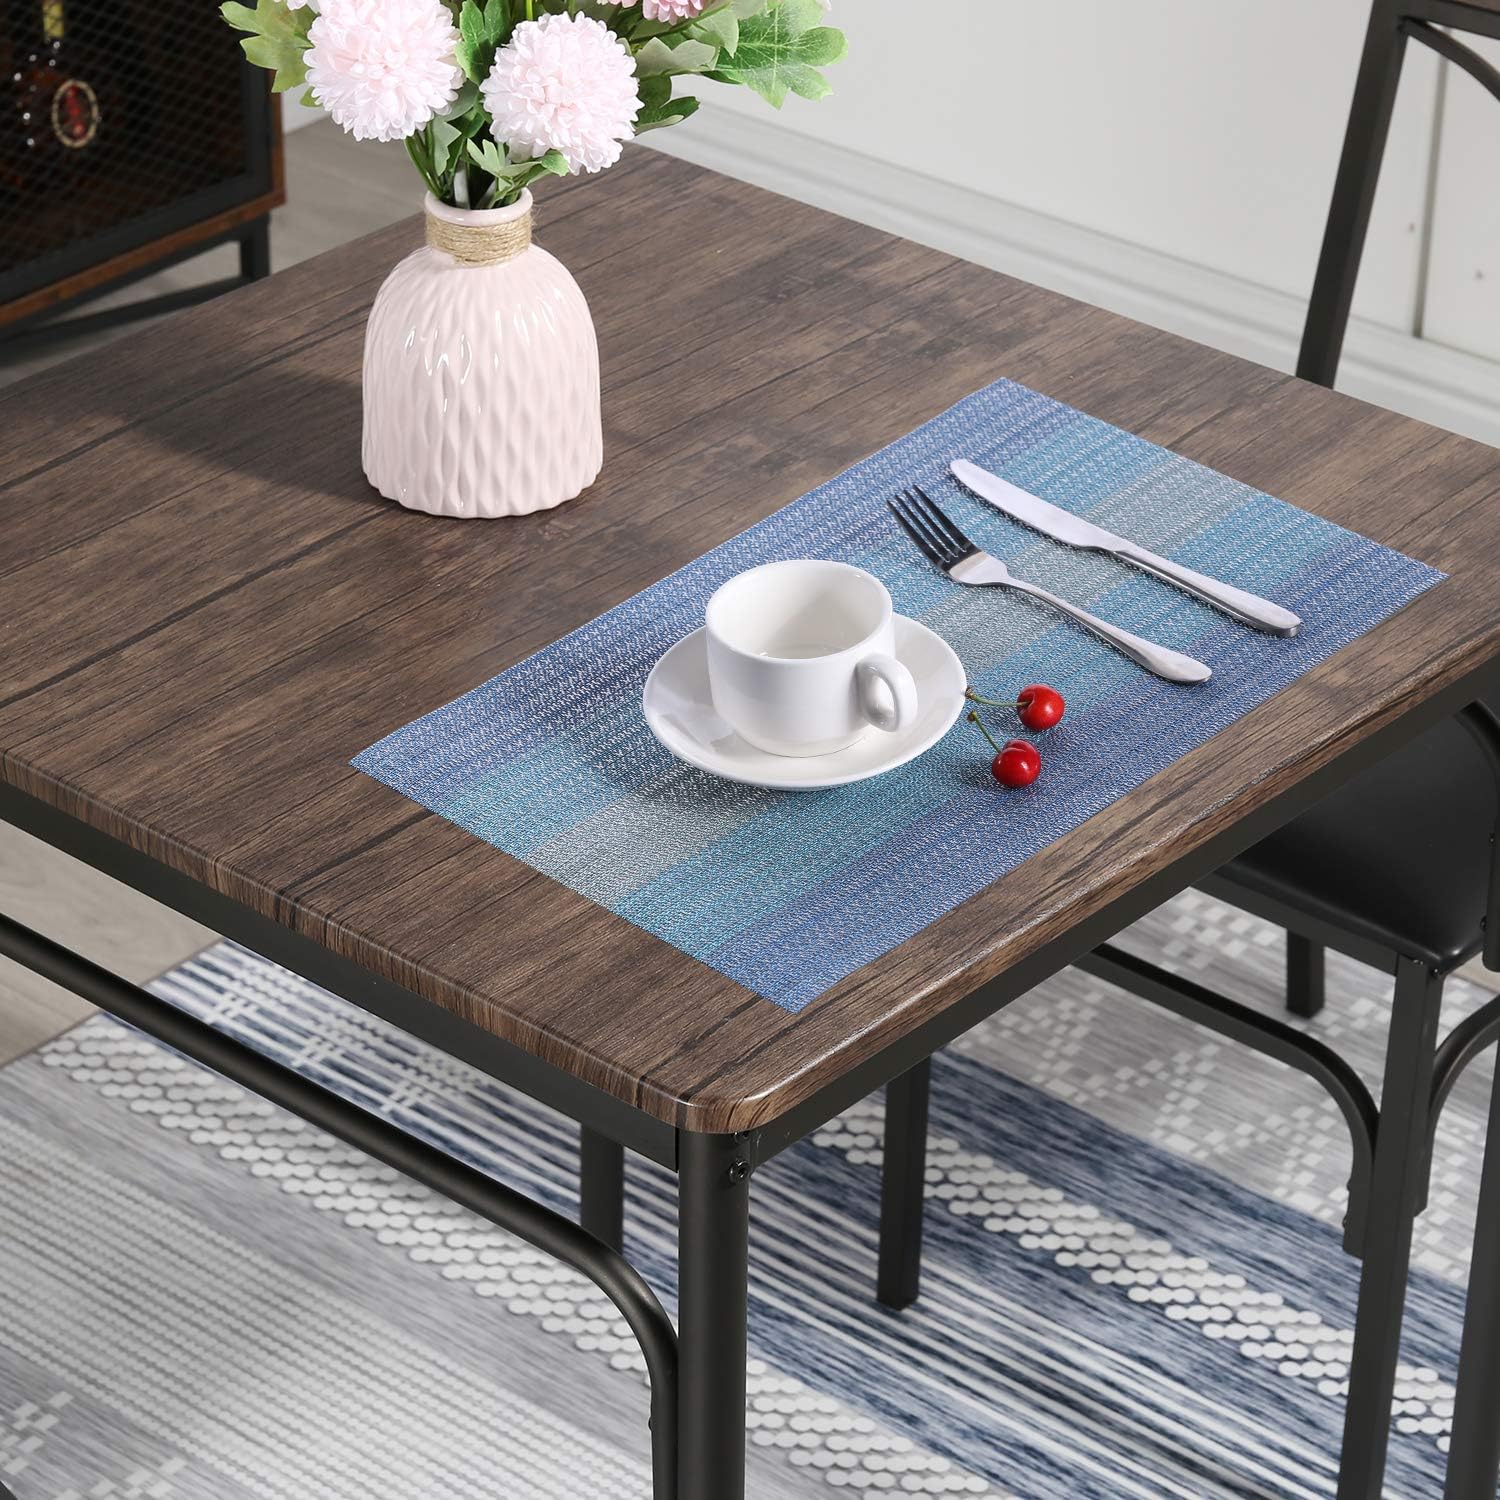 VECELO 3-Piece Dining Room Table Set with PU Padded Chairs for Kitchen - $60